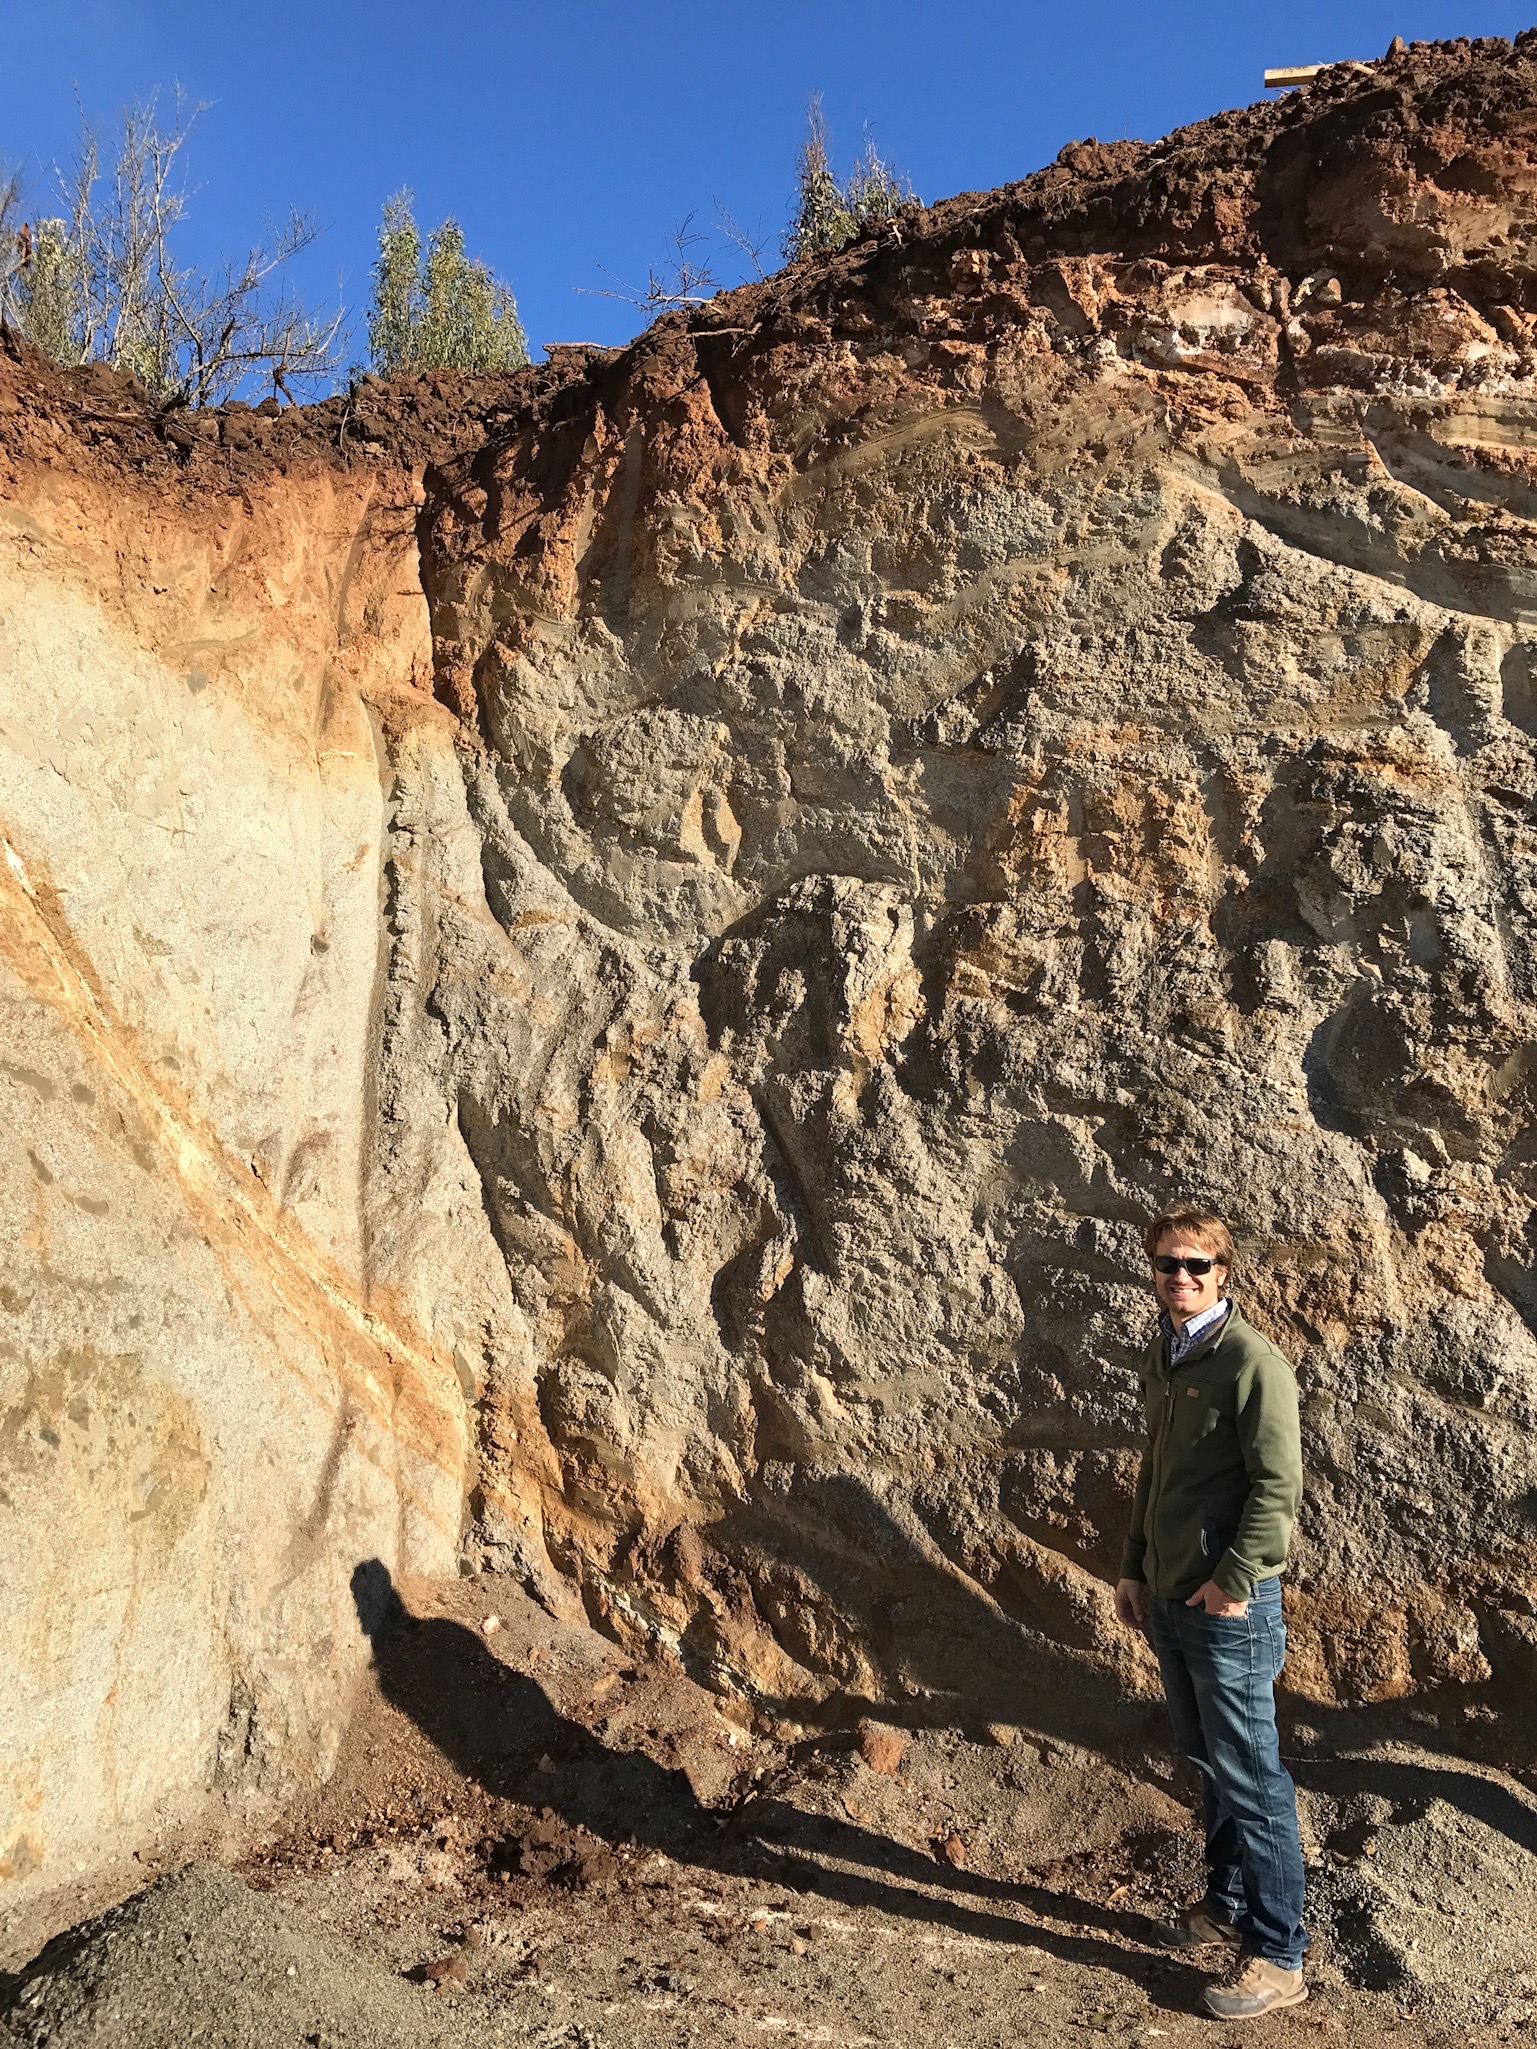 Our winemaker, Amael, at the construction giddy that he's able to see our soil profile up close.